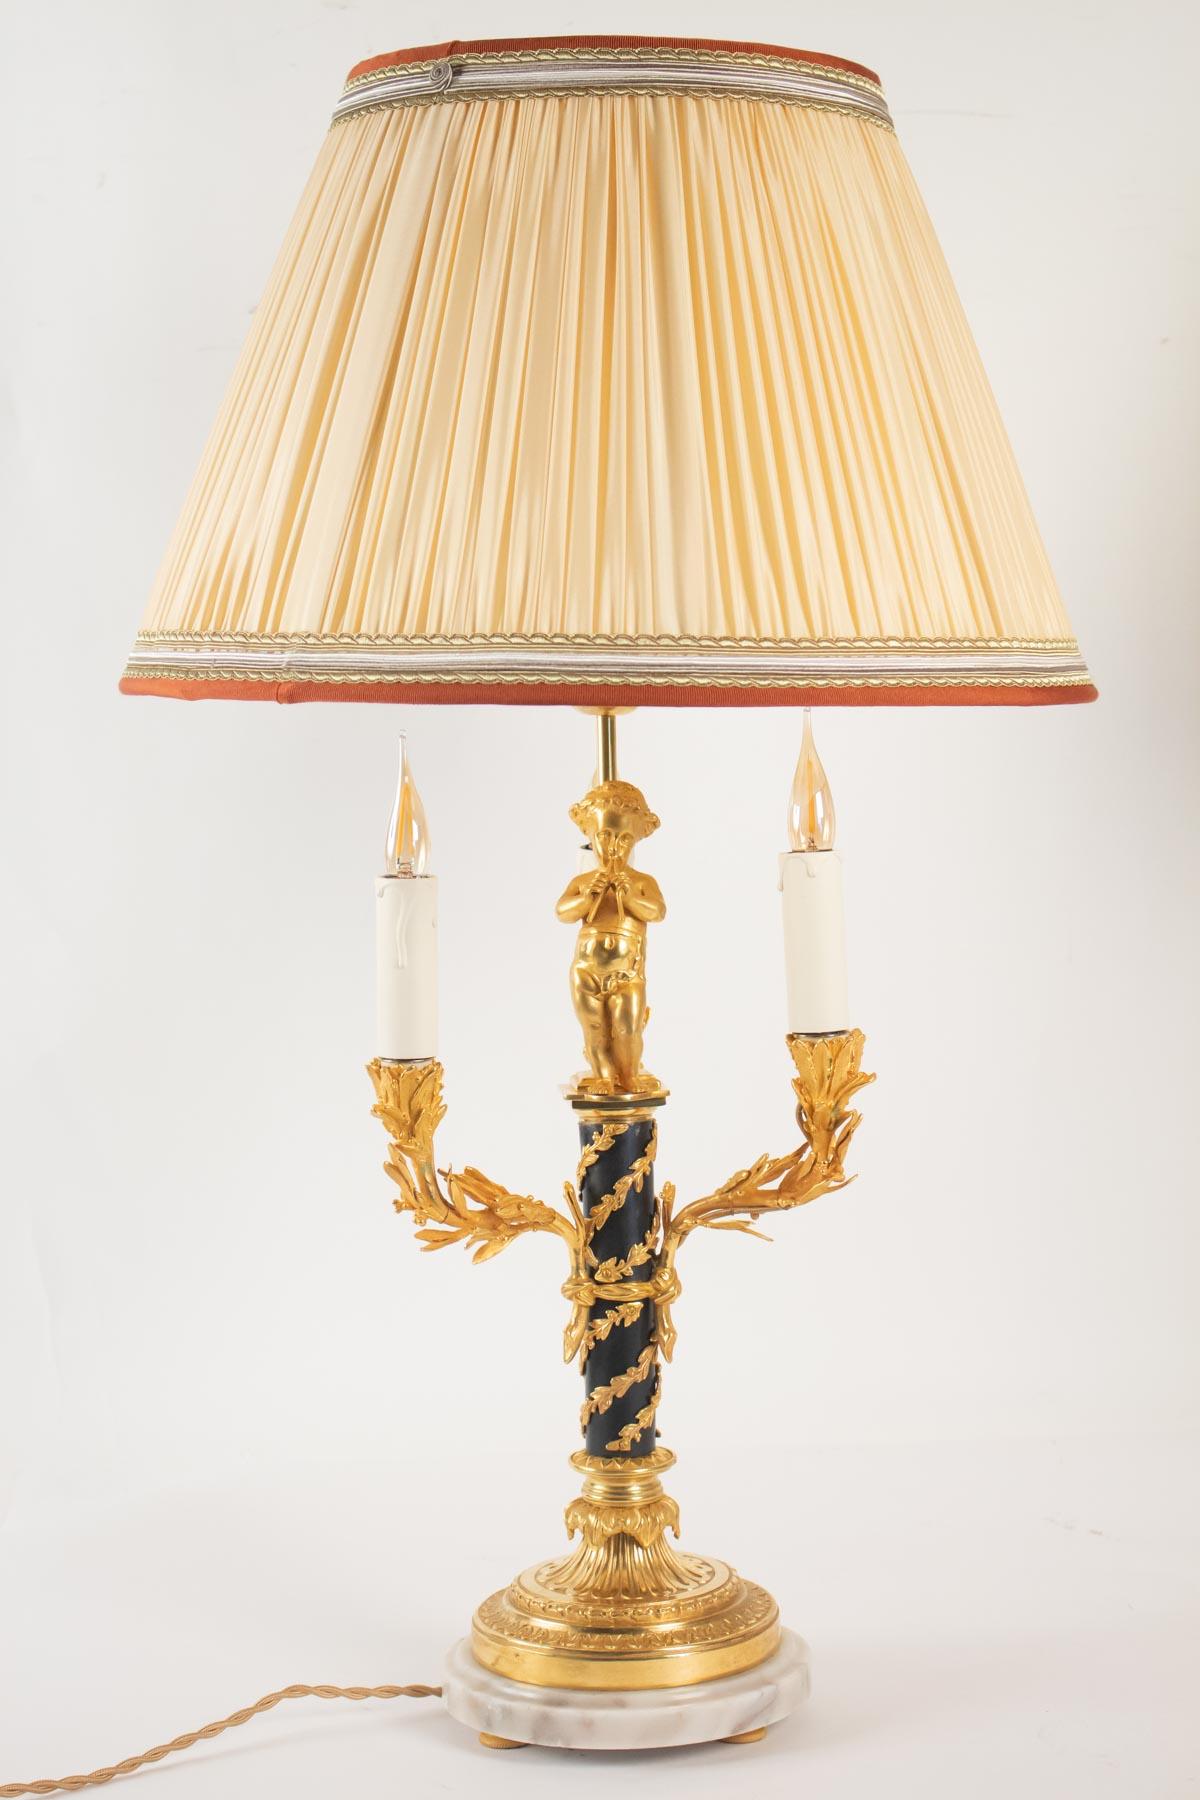 French Pair of Lamps in Love, 3 Lights, Gilt Bronze, Patinated, Louis XVI Style